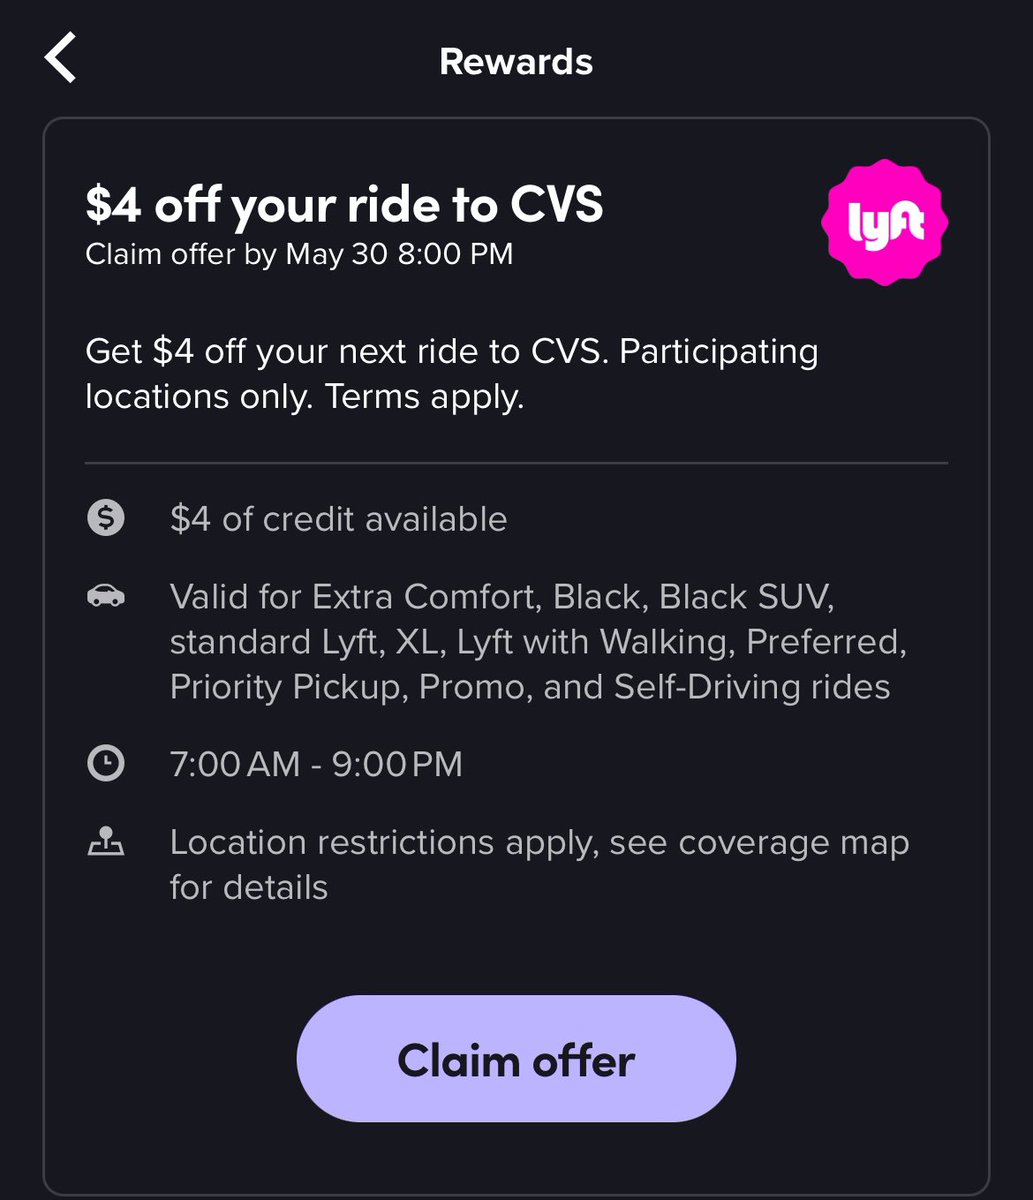 Saw this alert when I opened by Lyft app this weekend. 🚗 Could ride-share discounts to pharmacies help to improve equitable access to 💊? More on how Lyft x CVS were hoping to address this issue with Covid vaccines: lyft.com/blog/posts/lyf… #Pharmacoequity #HealthEquity